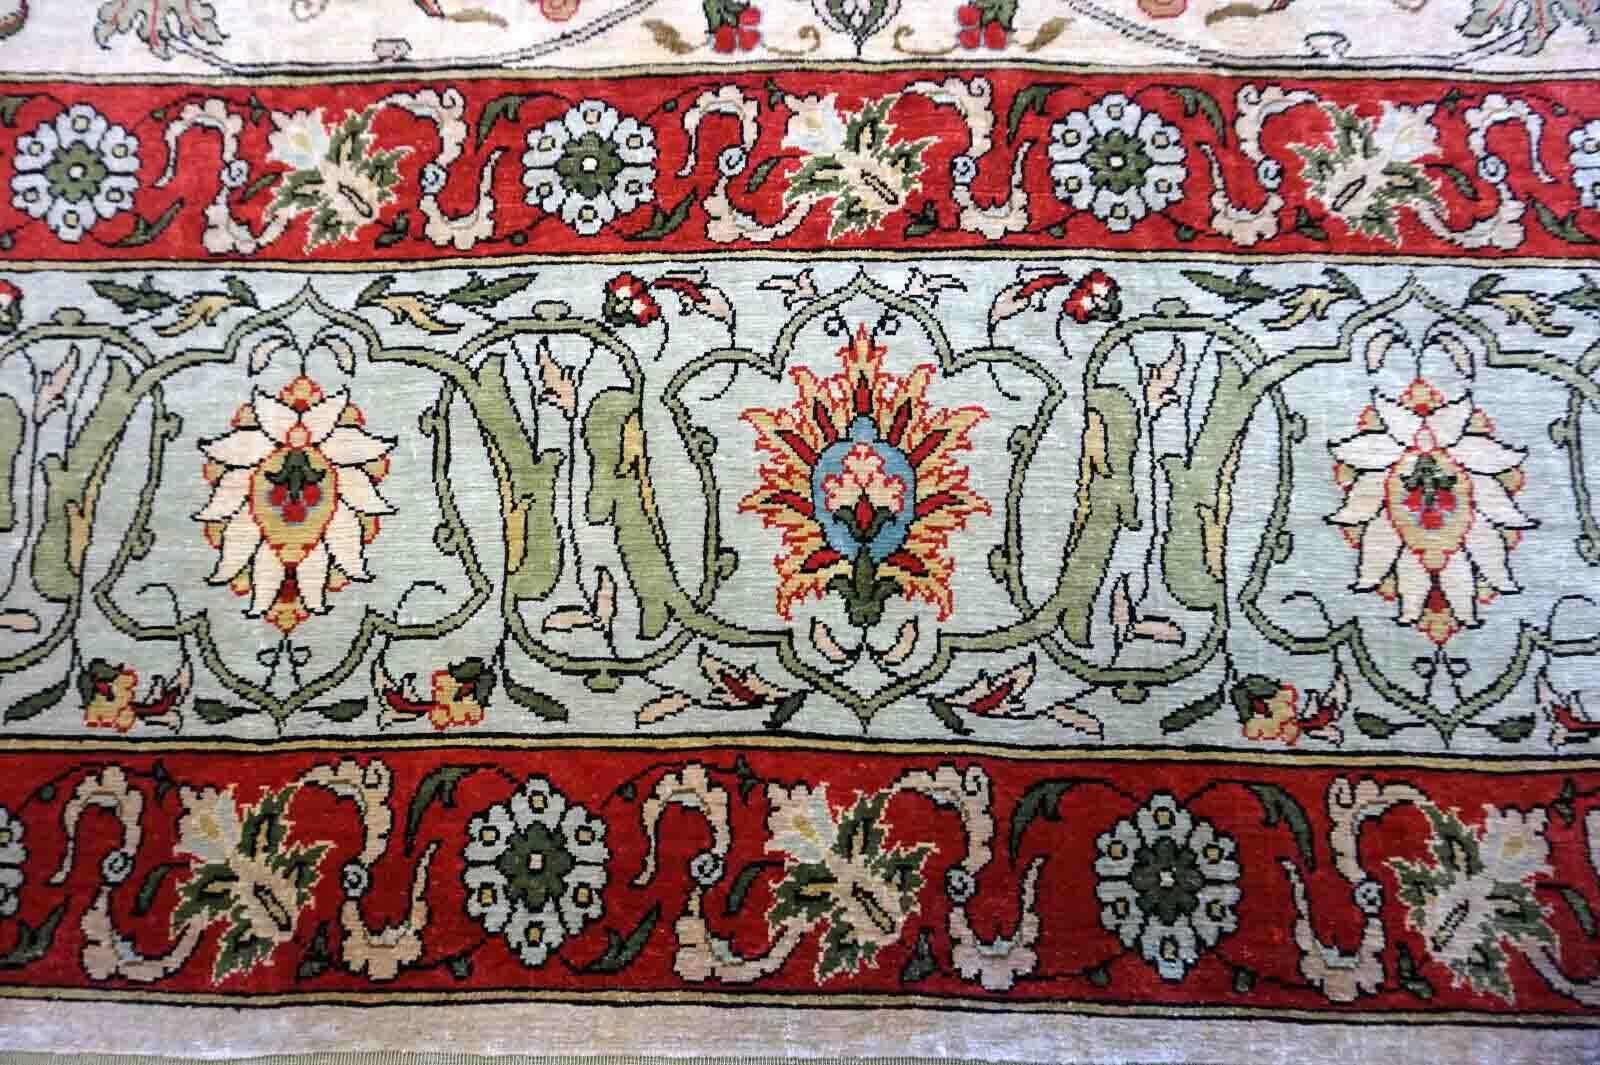 Handmade vintage Turkish Hereke rug made in natural silk and prayer design. The rug is from the middle of 20th century in original good condition.

-Condition: original good,

-circa: 1970s,

-Size: 3.9' x 5.9' (120cm x 181cm).

-Material: